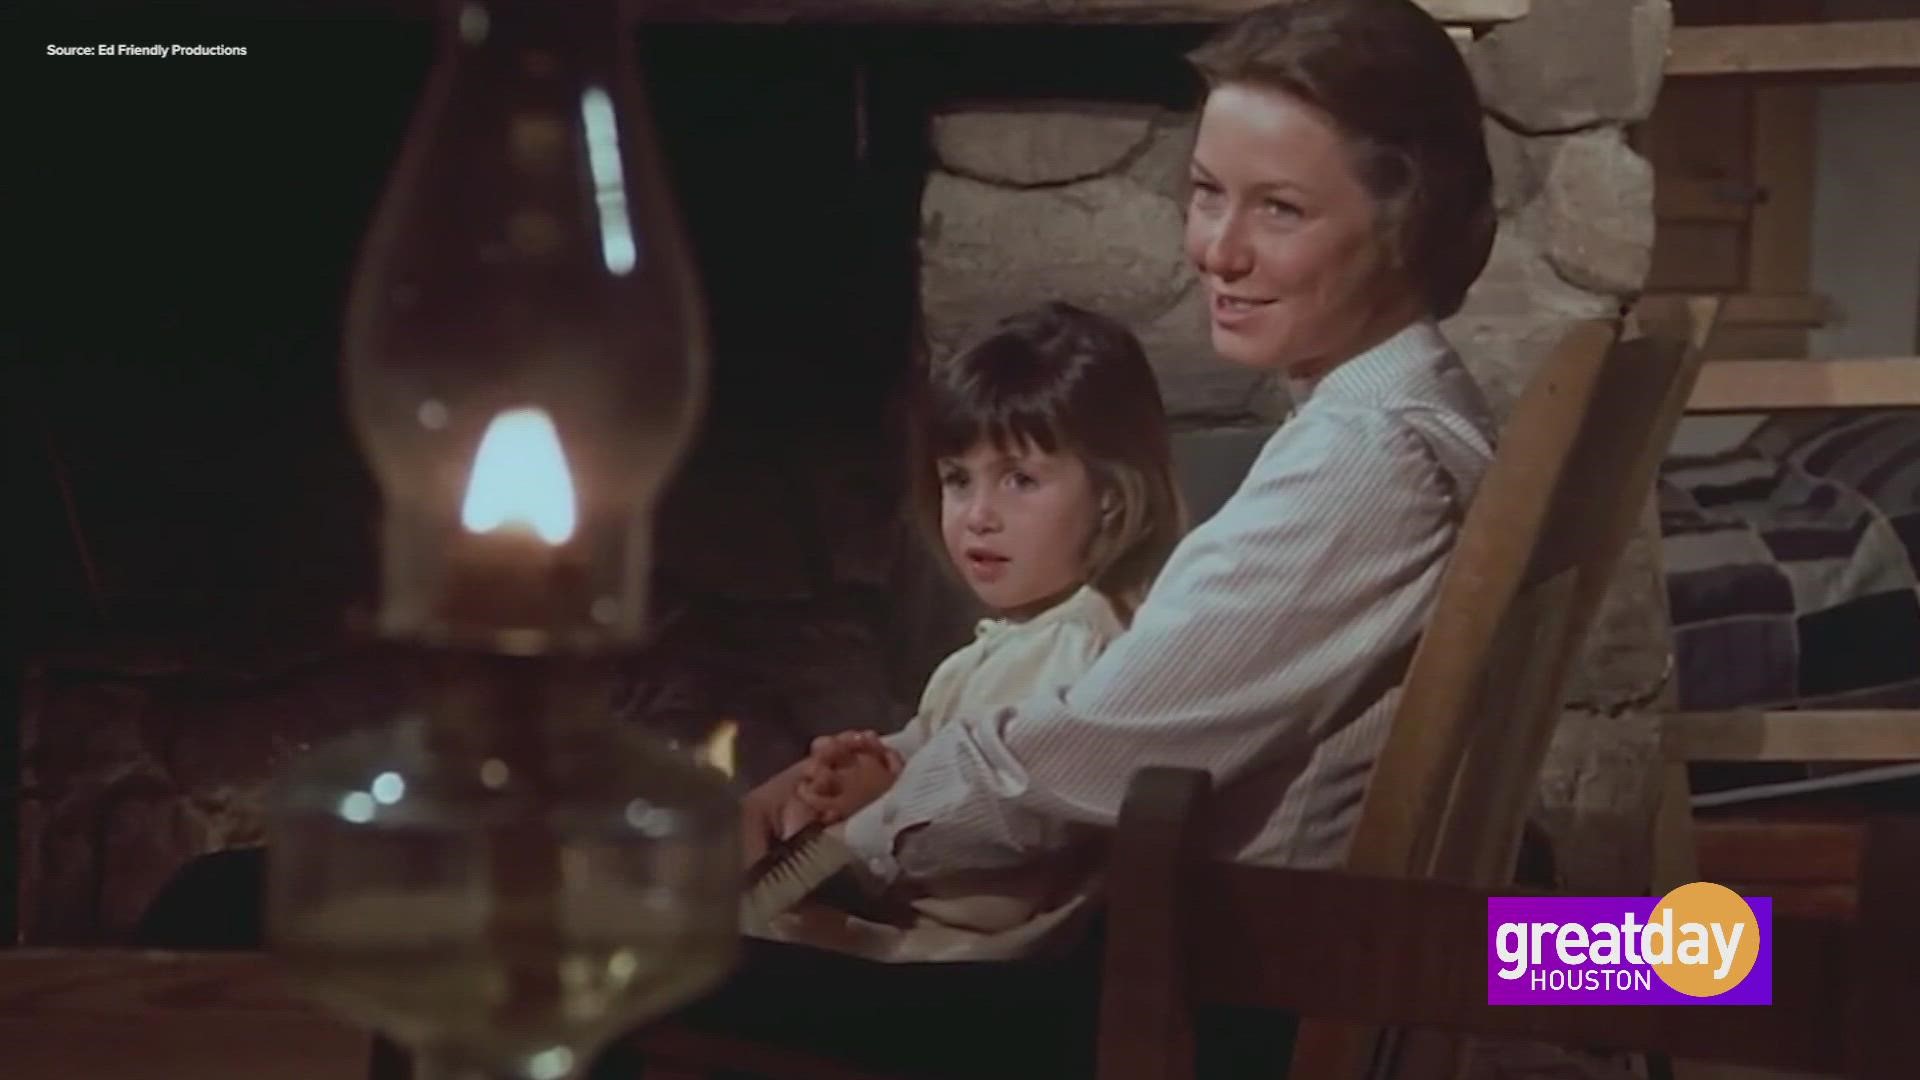 Actress Karen Grassle, who played "Ma" on Little House on the Prairie, takes us behind the scenes and beyond life on the prairie.